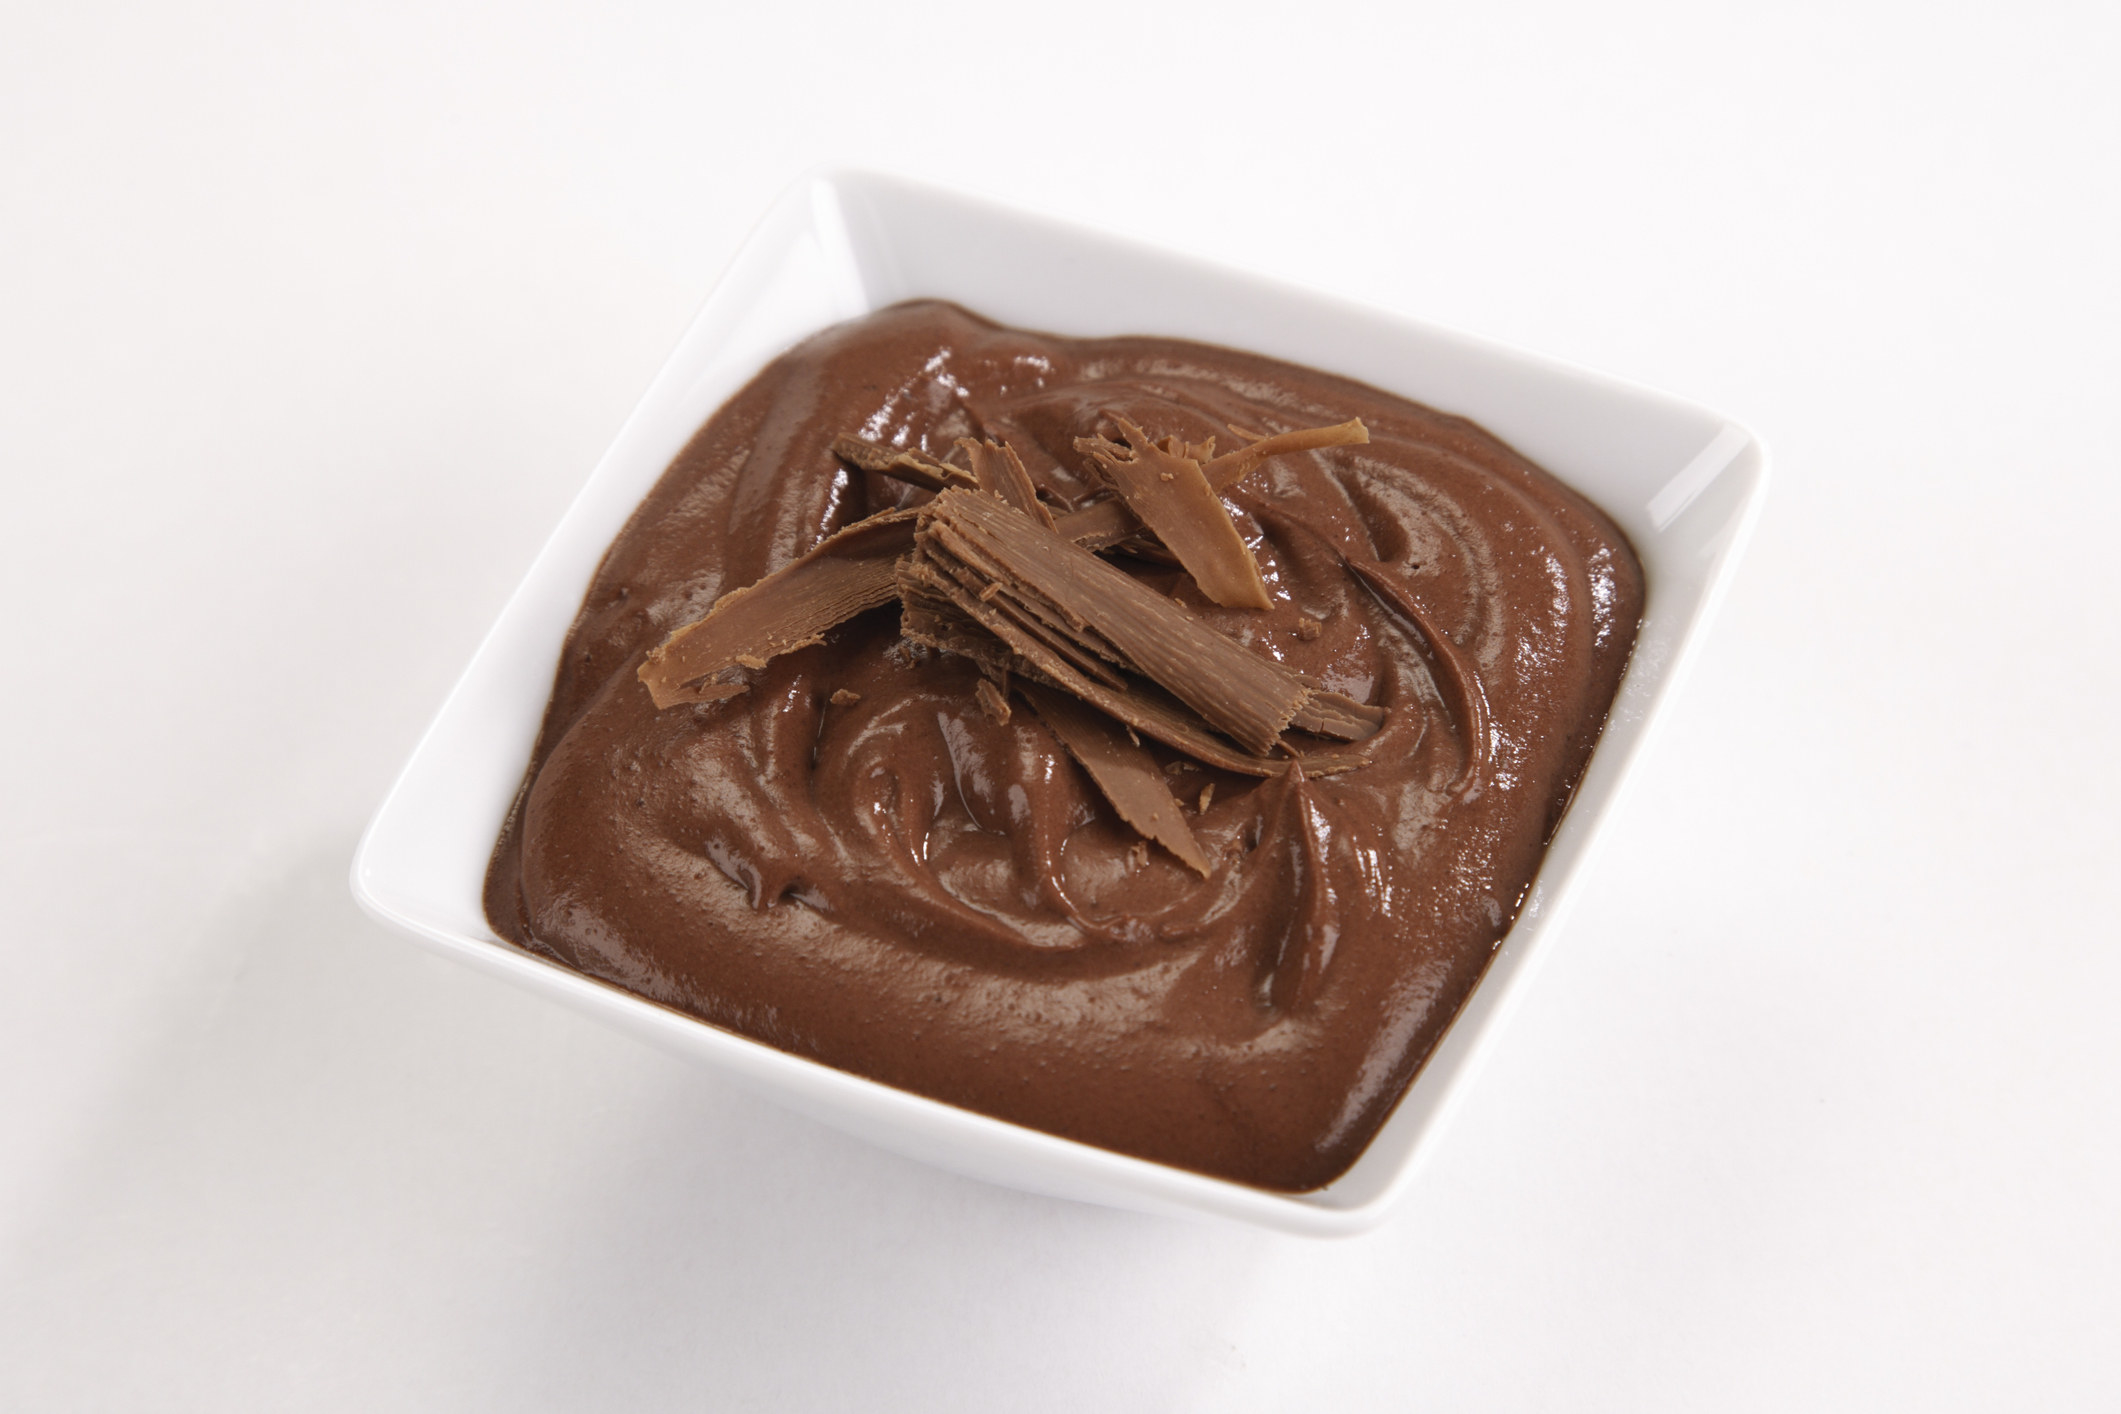 Chocolate pudding in a bowl